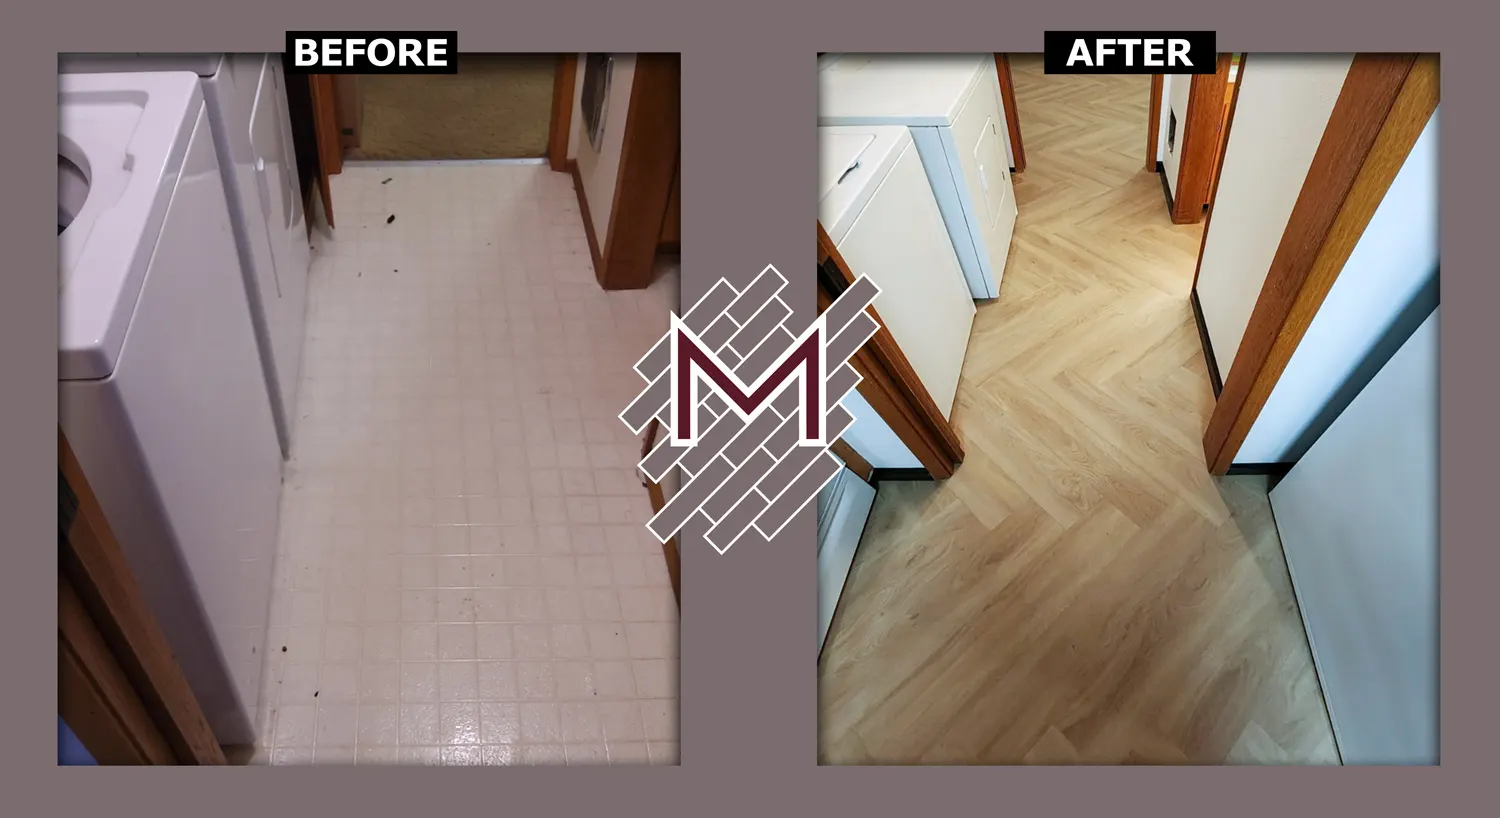 Before and after picture showing the old flooring and the new flooring installed. New flooring installation by Modern Flooring Services.